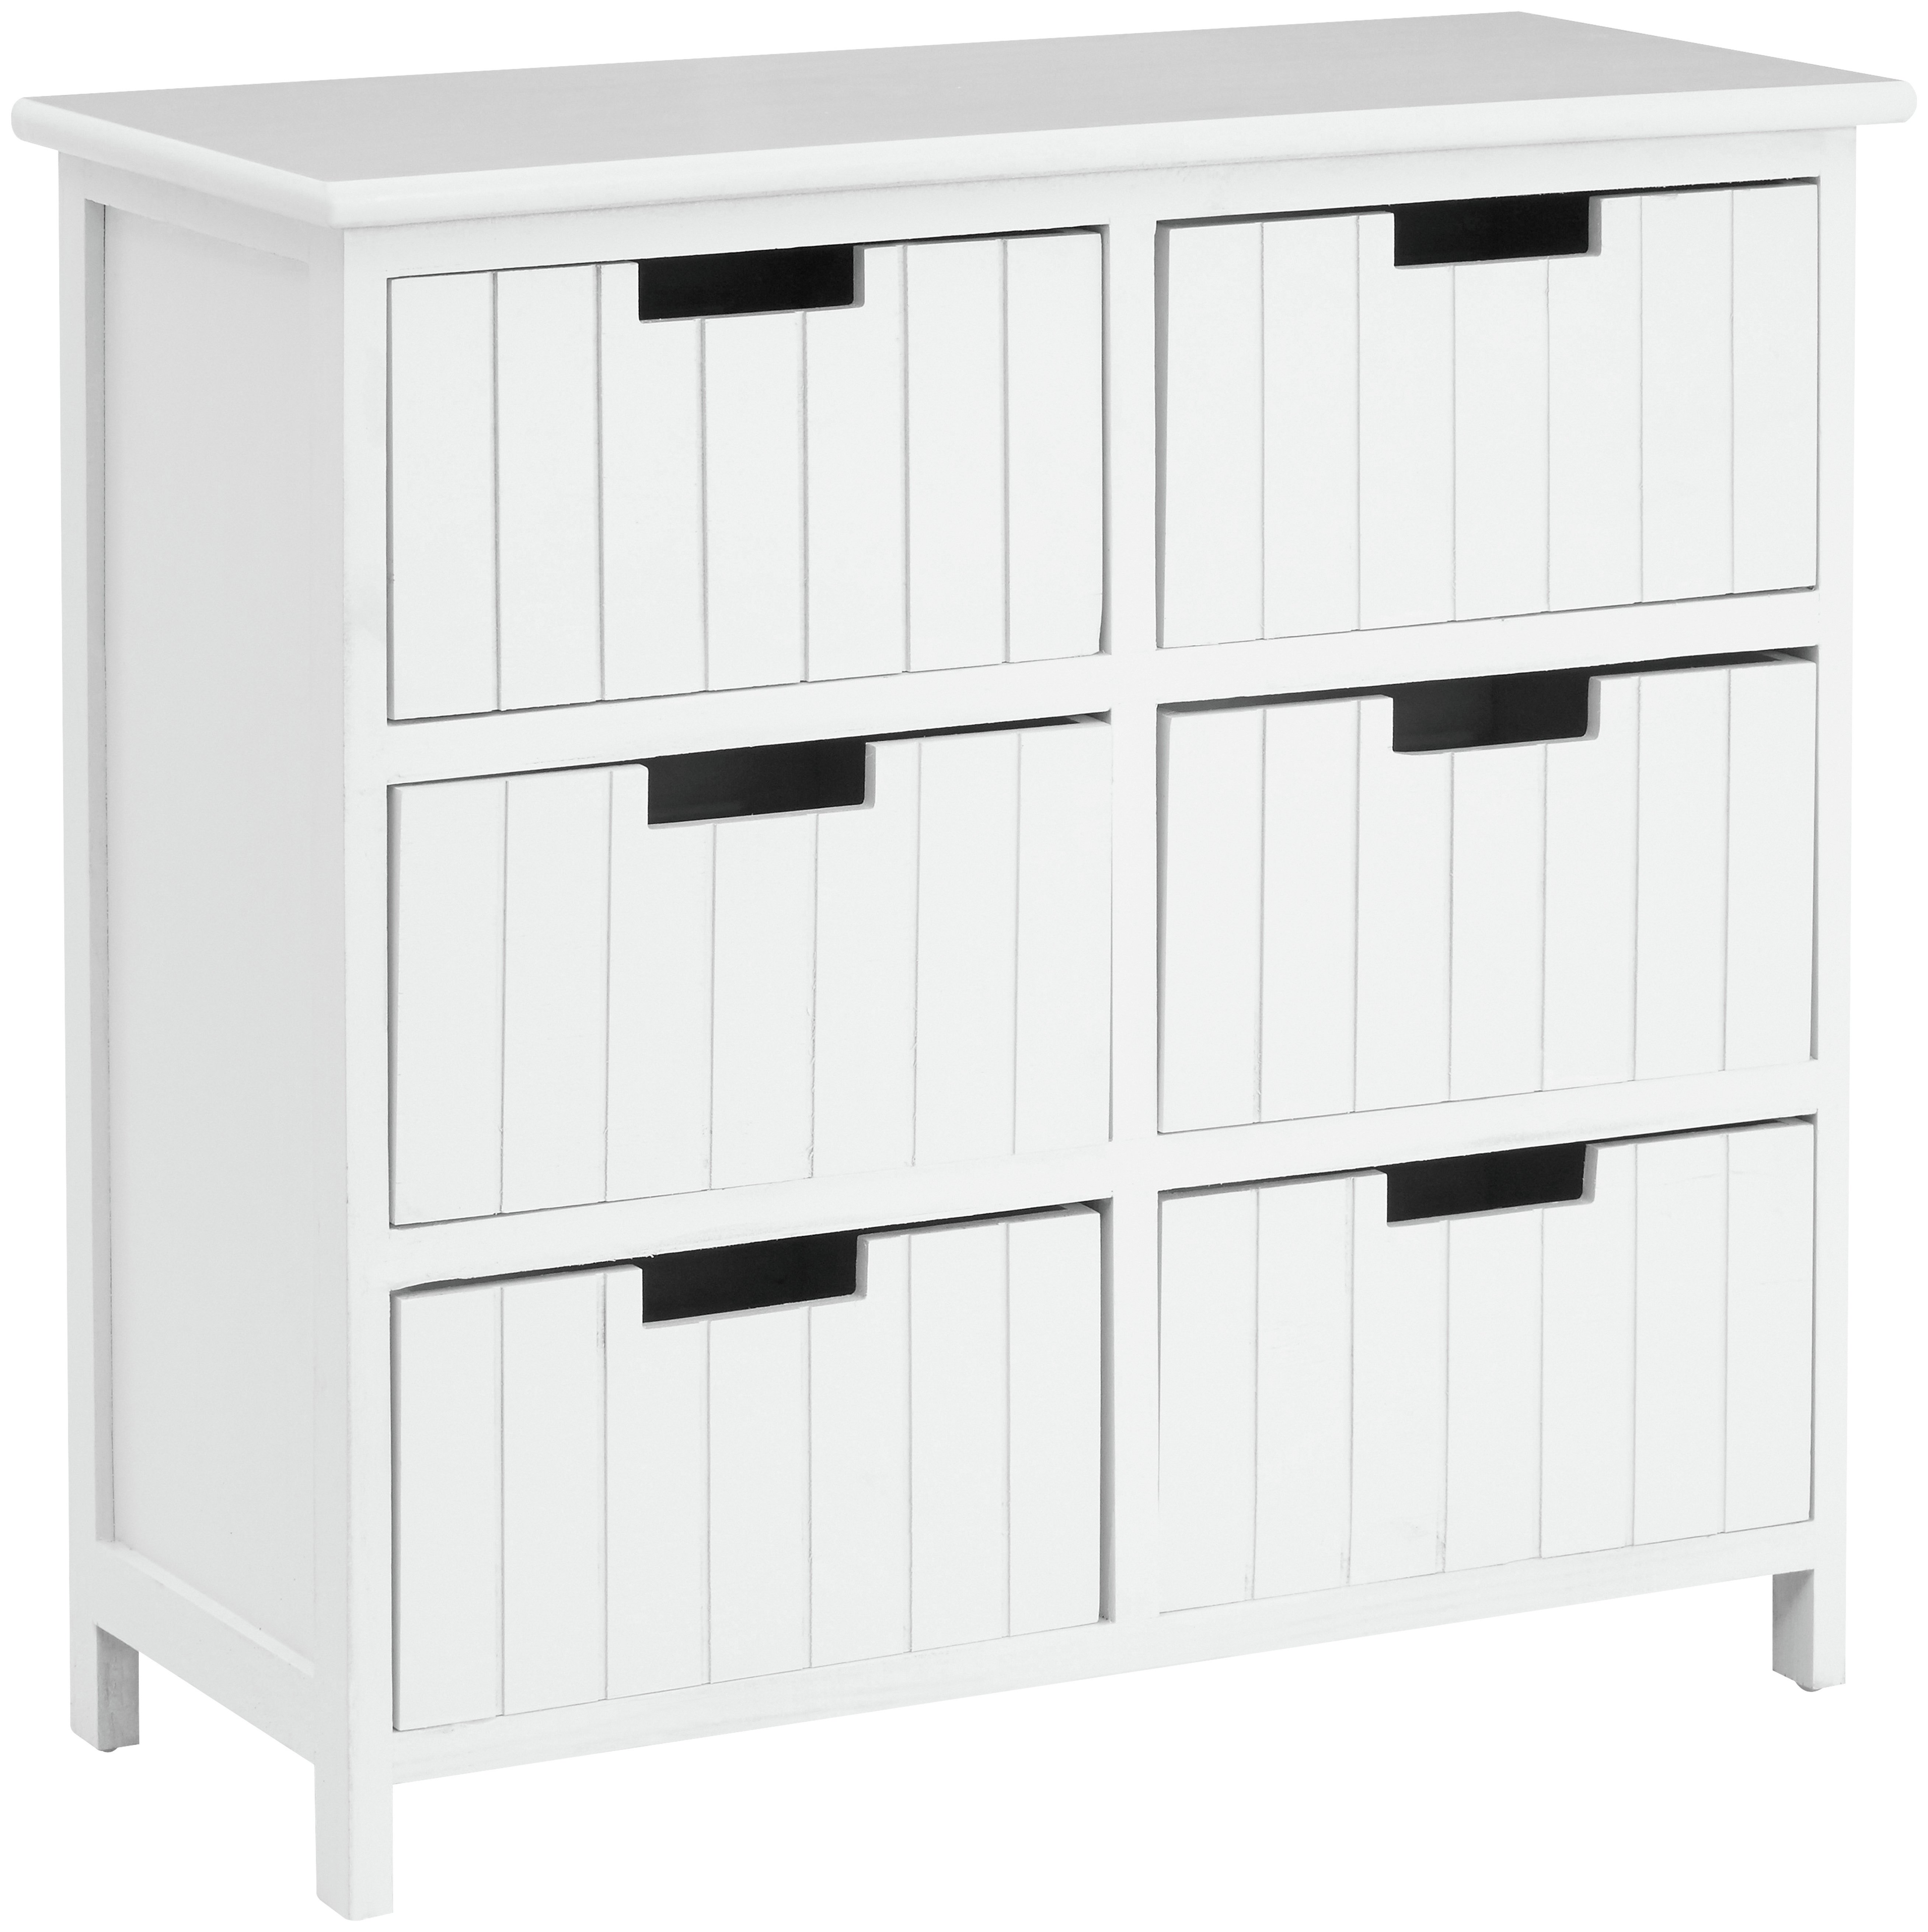 Premier Housewares New England Chest of Drawers - White